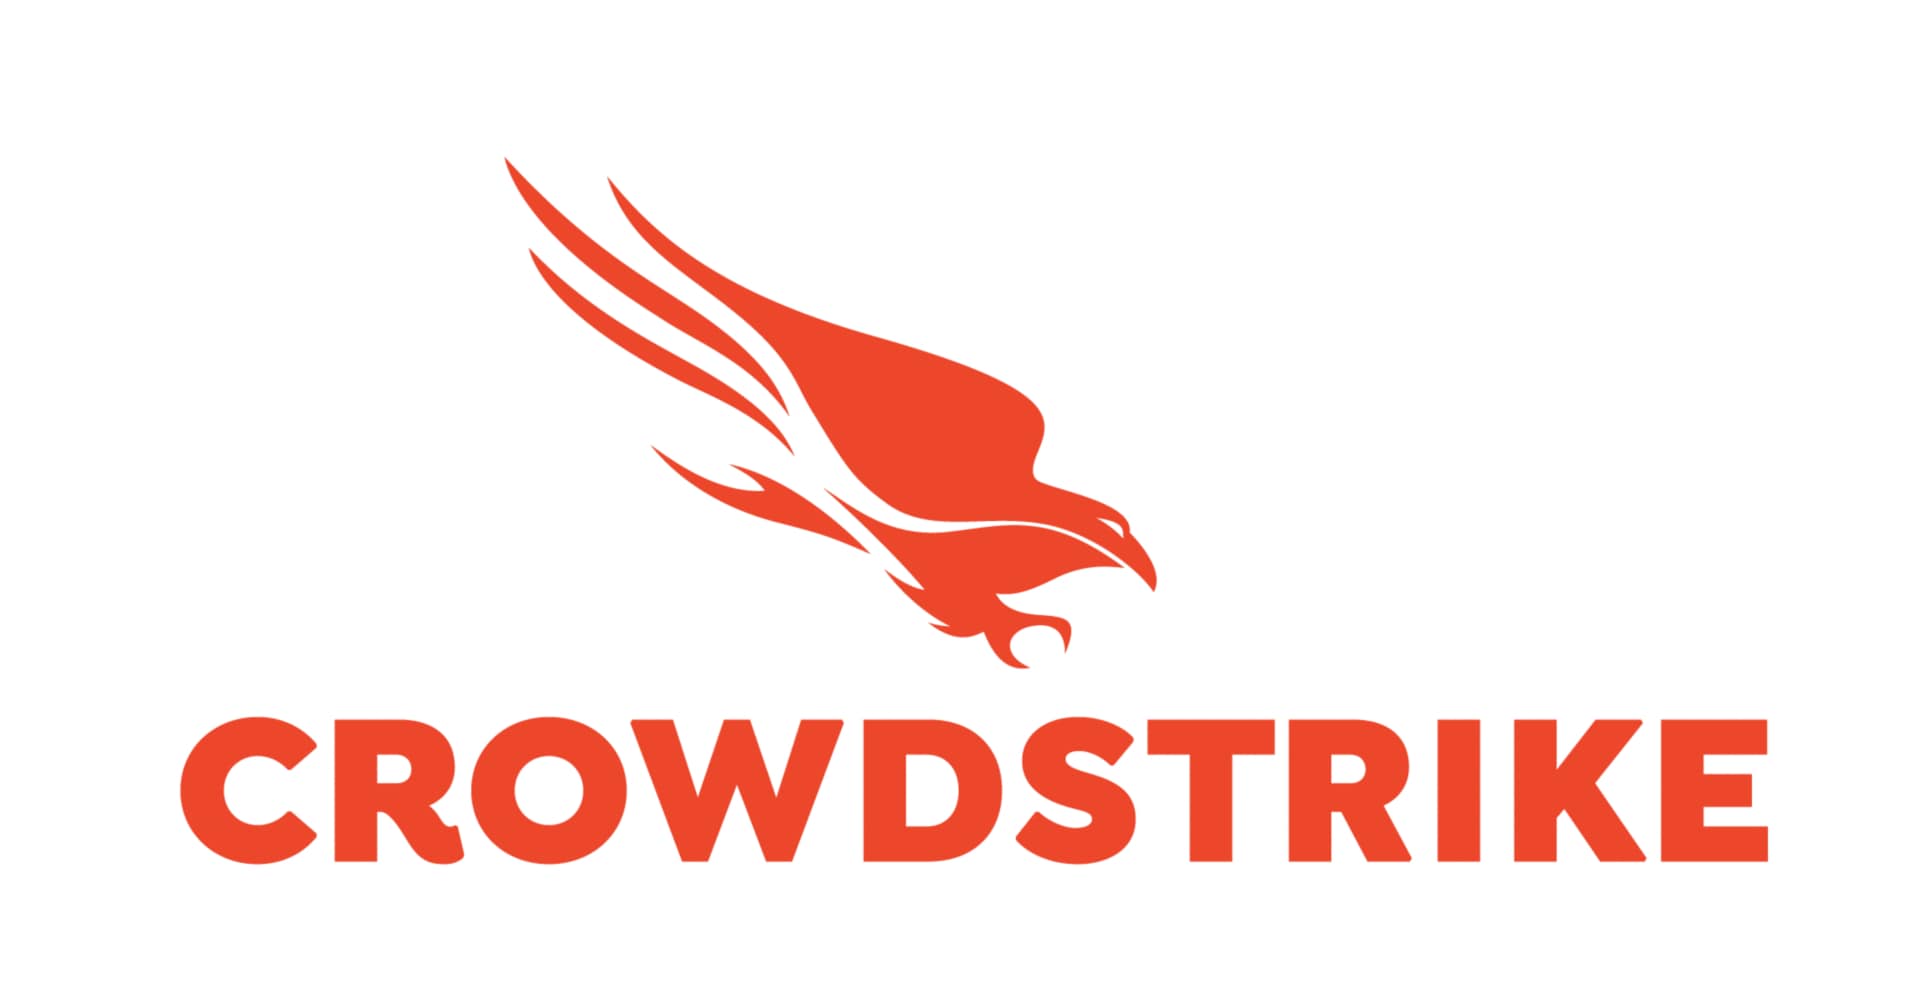 CrowdStrike 36-Month Falcon Insight (EDR) Application Software